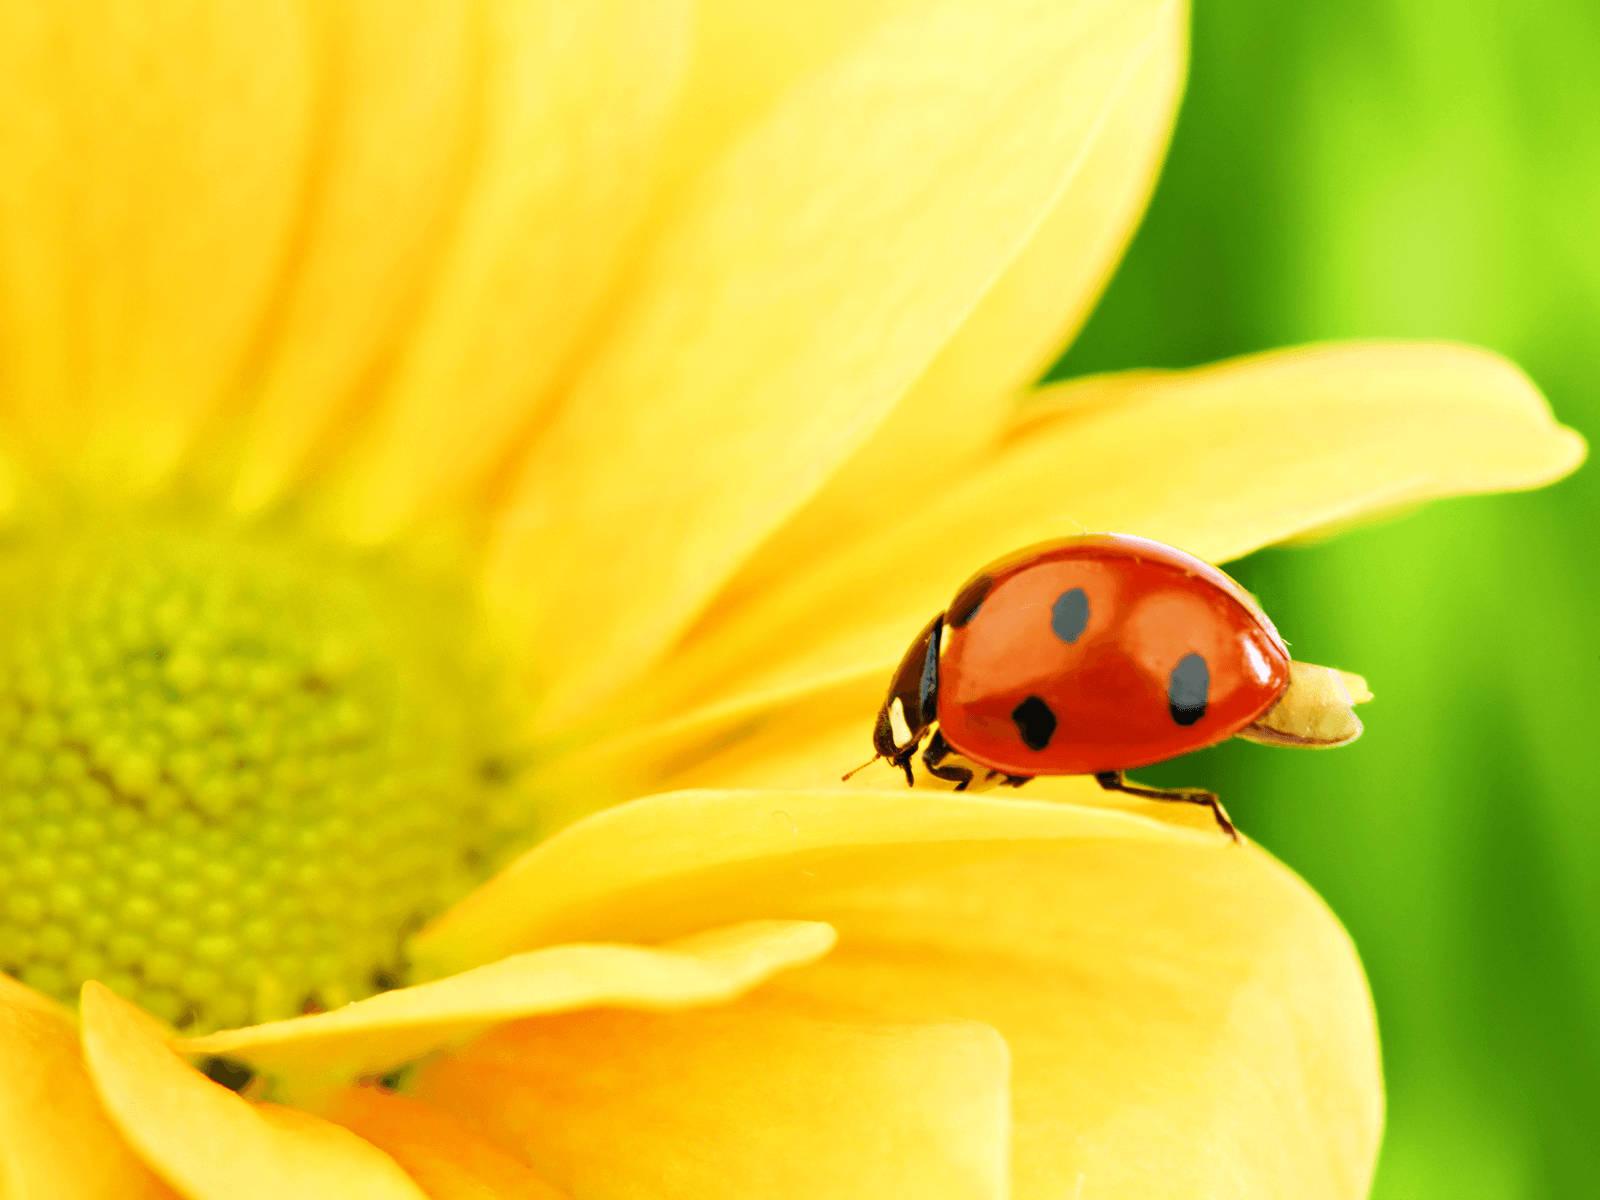 Ladybug And A Sunflower Wallpaper